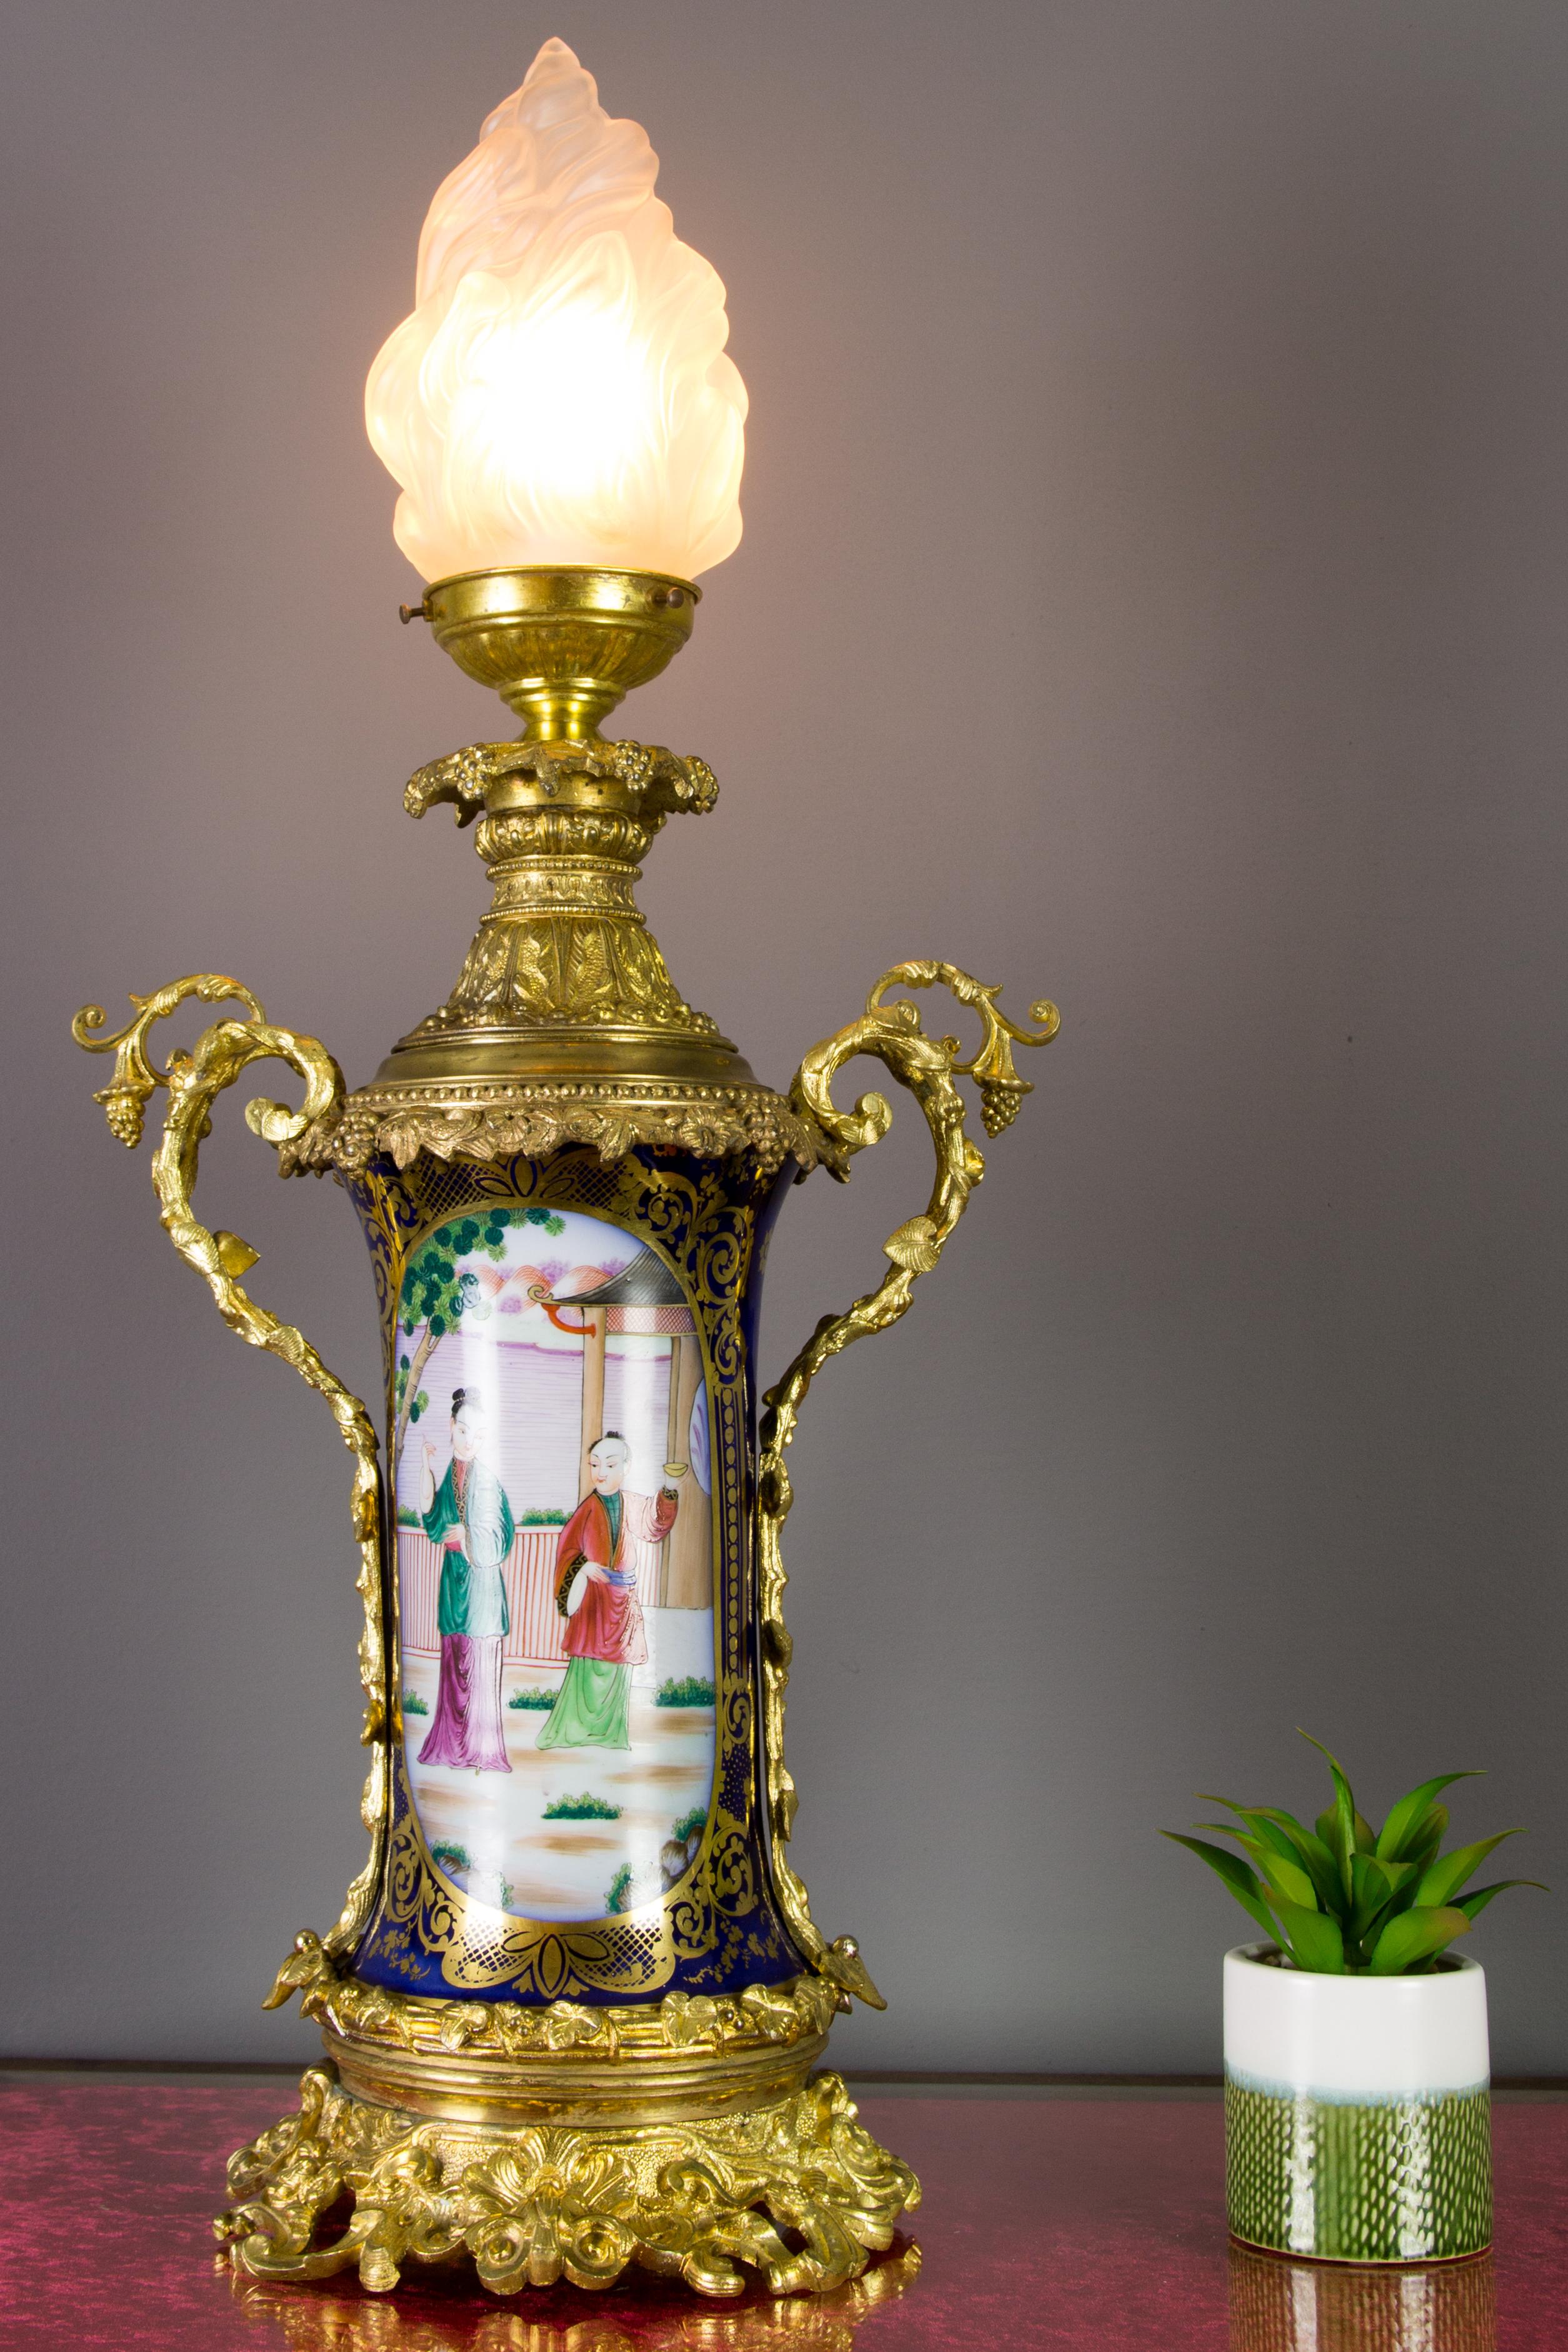 This amazing and large late 19th-century oil lamp mounted on a gilt bronze base and fitted with bronze cap and handles, features a cobalt blue and hand-painted porcelain body with chinoiserie style colorful scenes. Ornate gilt bronze details in